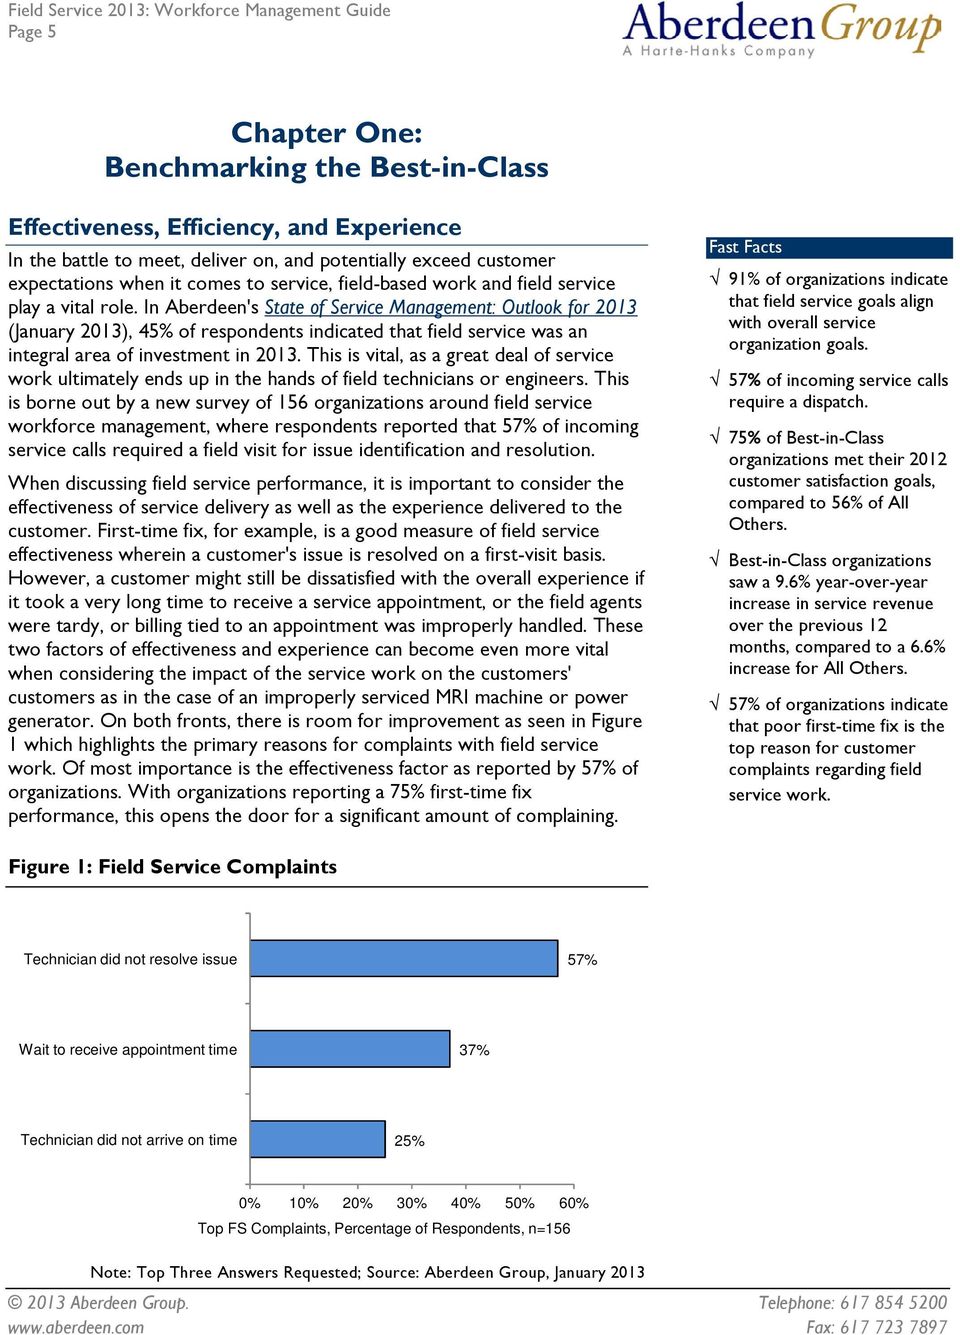 In Aberdeen's State of Service Management: Outlook for 2013 (January 2013), 45% of respondents indicated that field service was an integral area of investment in 2013.